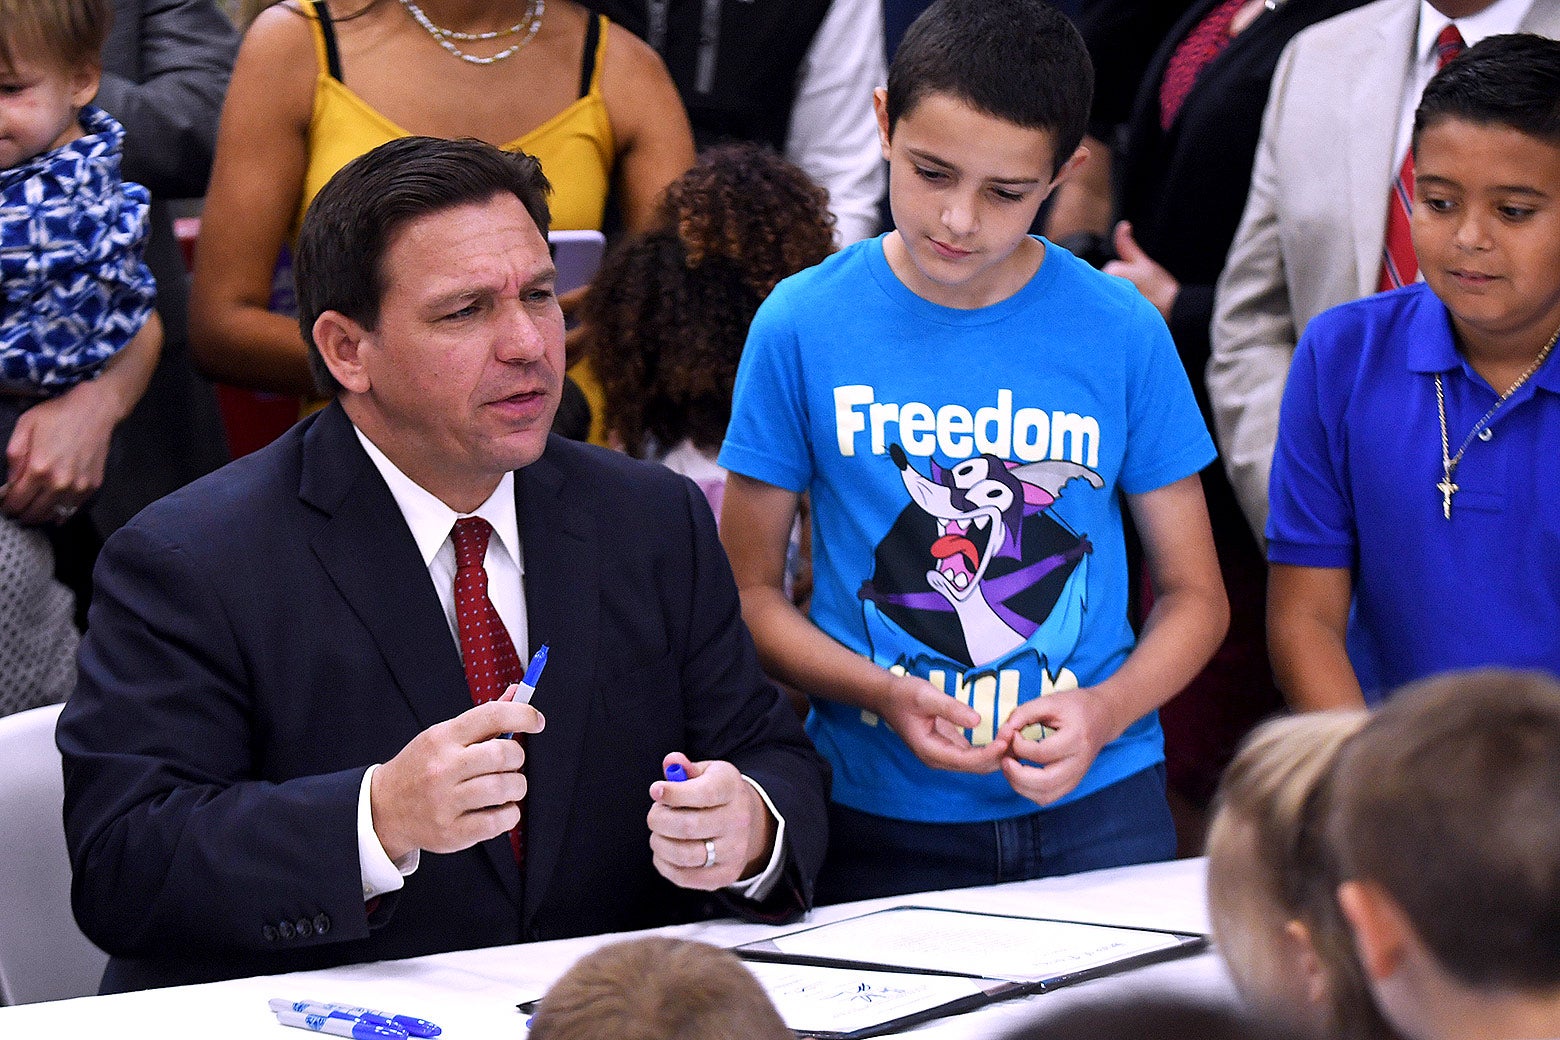 Ron DeSantis tries to erase trans people from Florida schools.